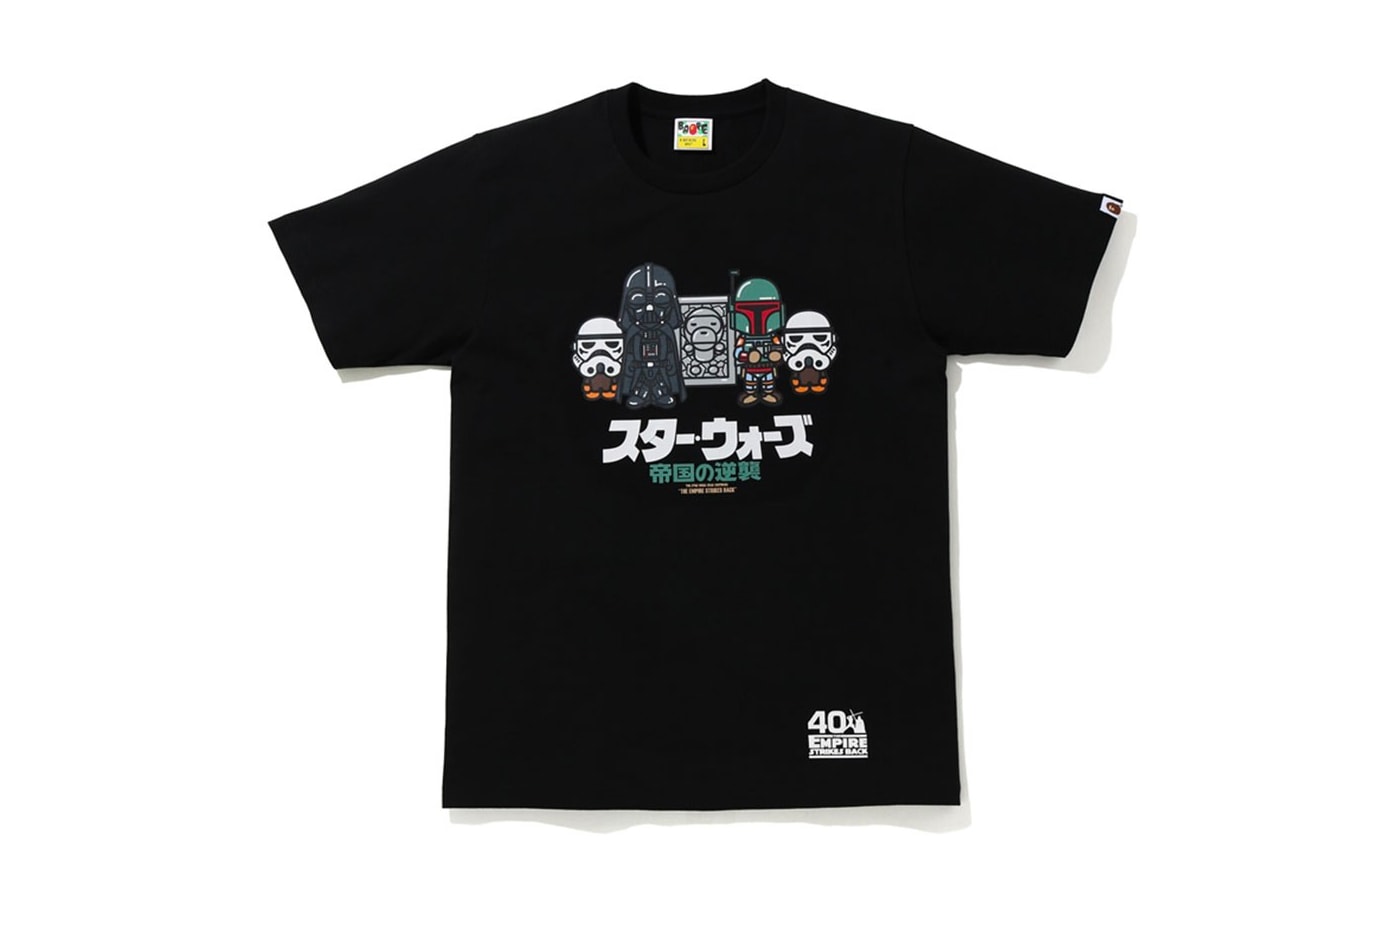 Star Wars The Empire Strikes Back 40th Anniversary BAPE Collection release info a bathing ape medicom toy bearbrick vcd figures boba fett darth vader